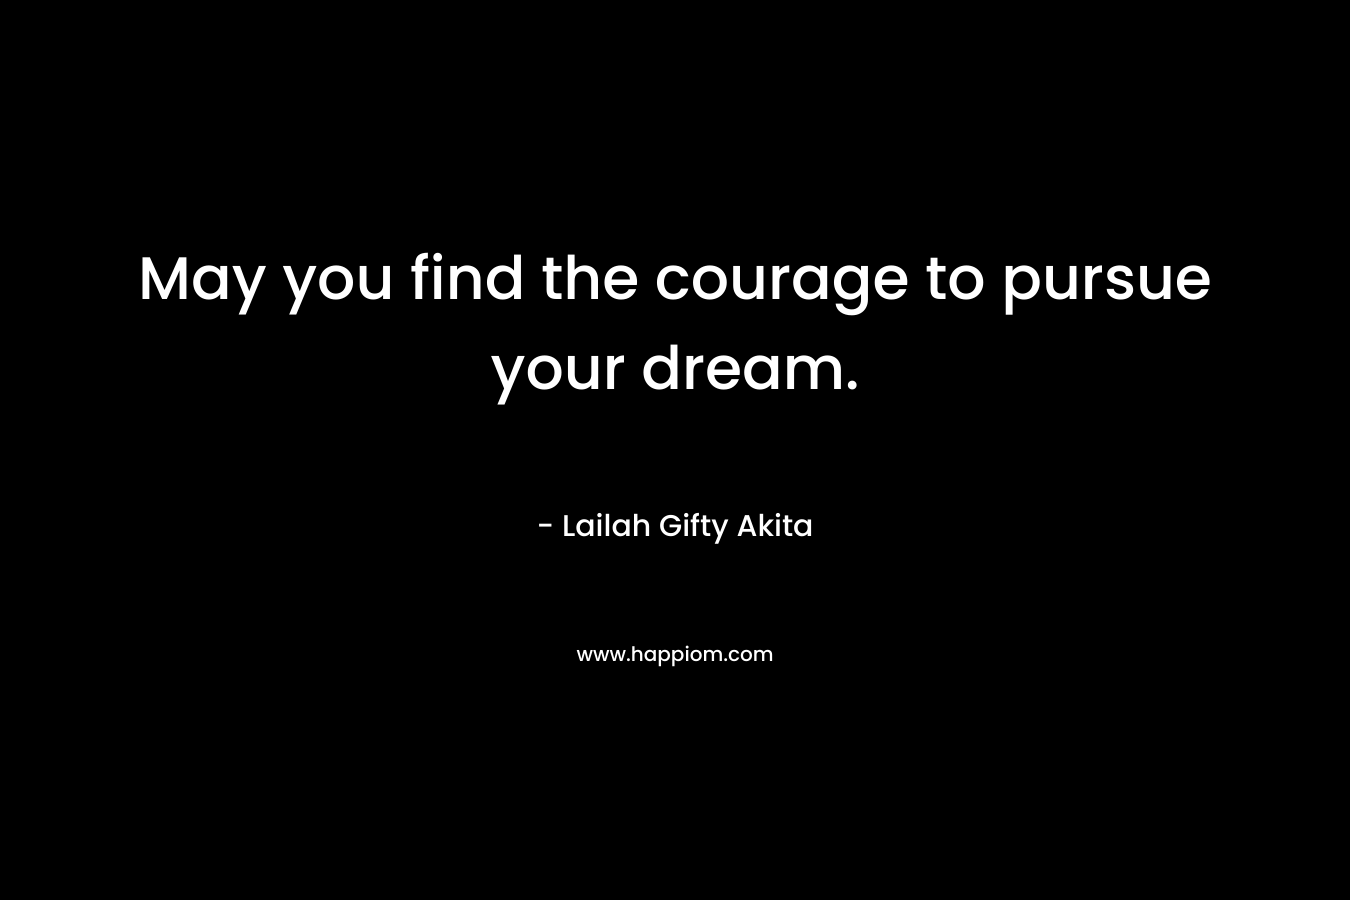 May you find the courage to pursue your dream.